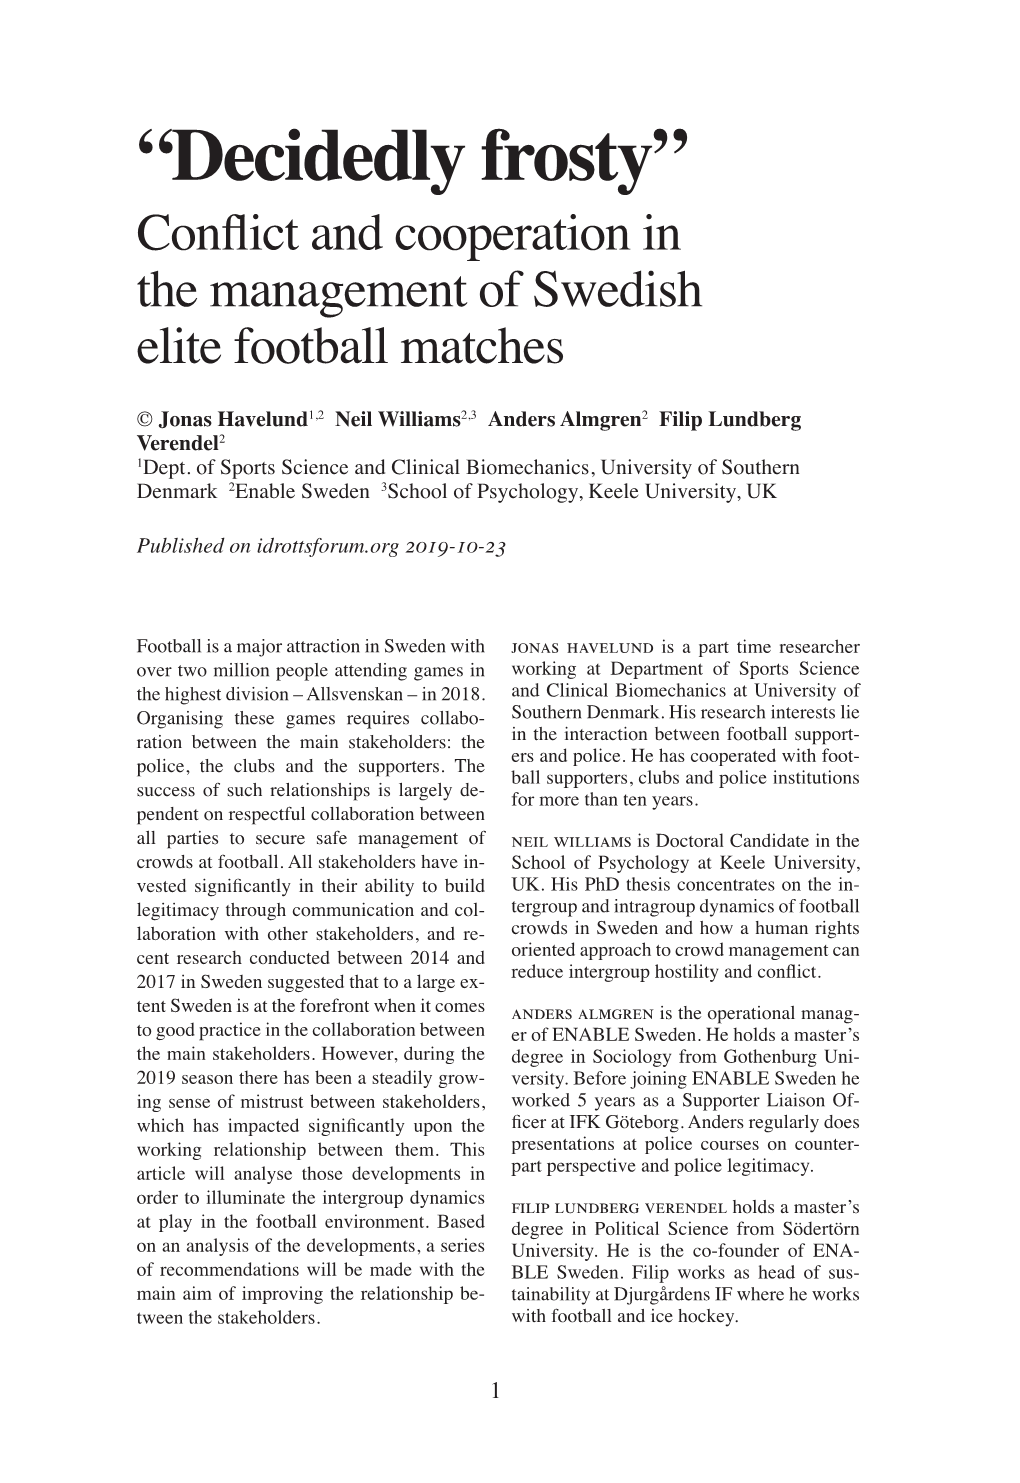 “Decidedly Frosty” Conflict and Cooperation in the Management of Swedish Elite Football Matches